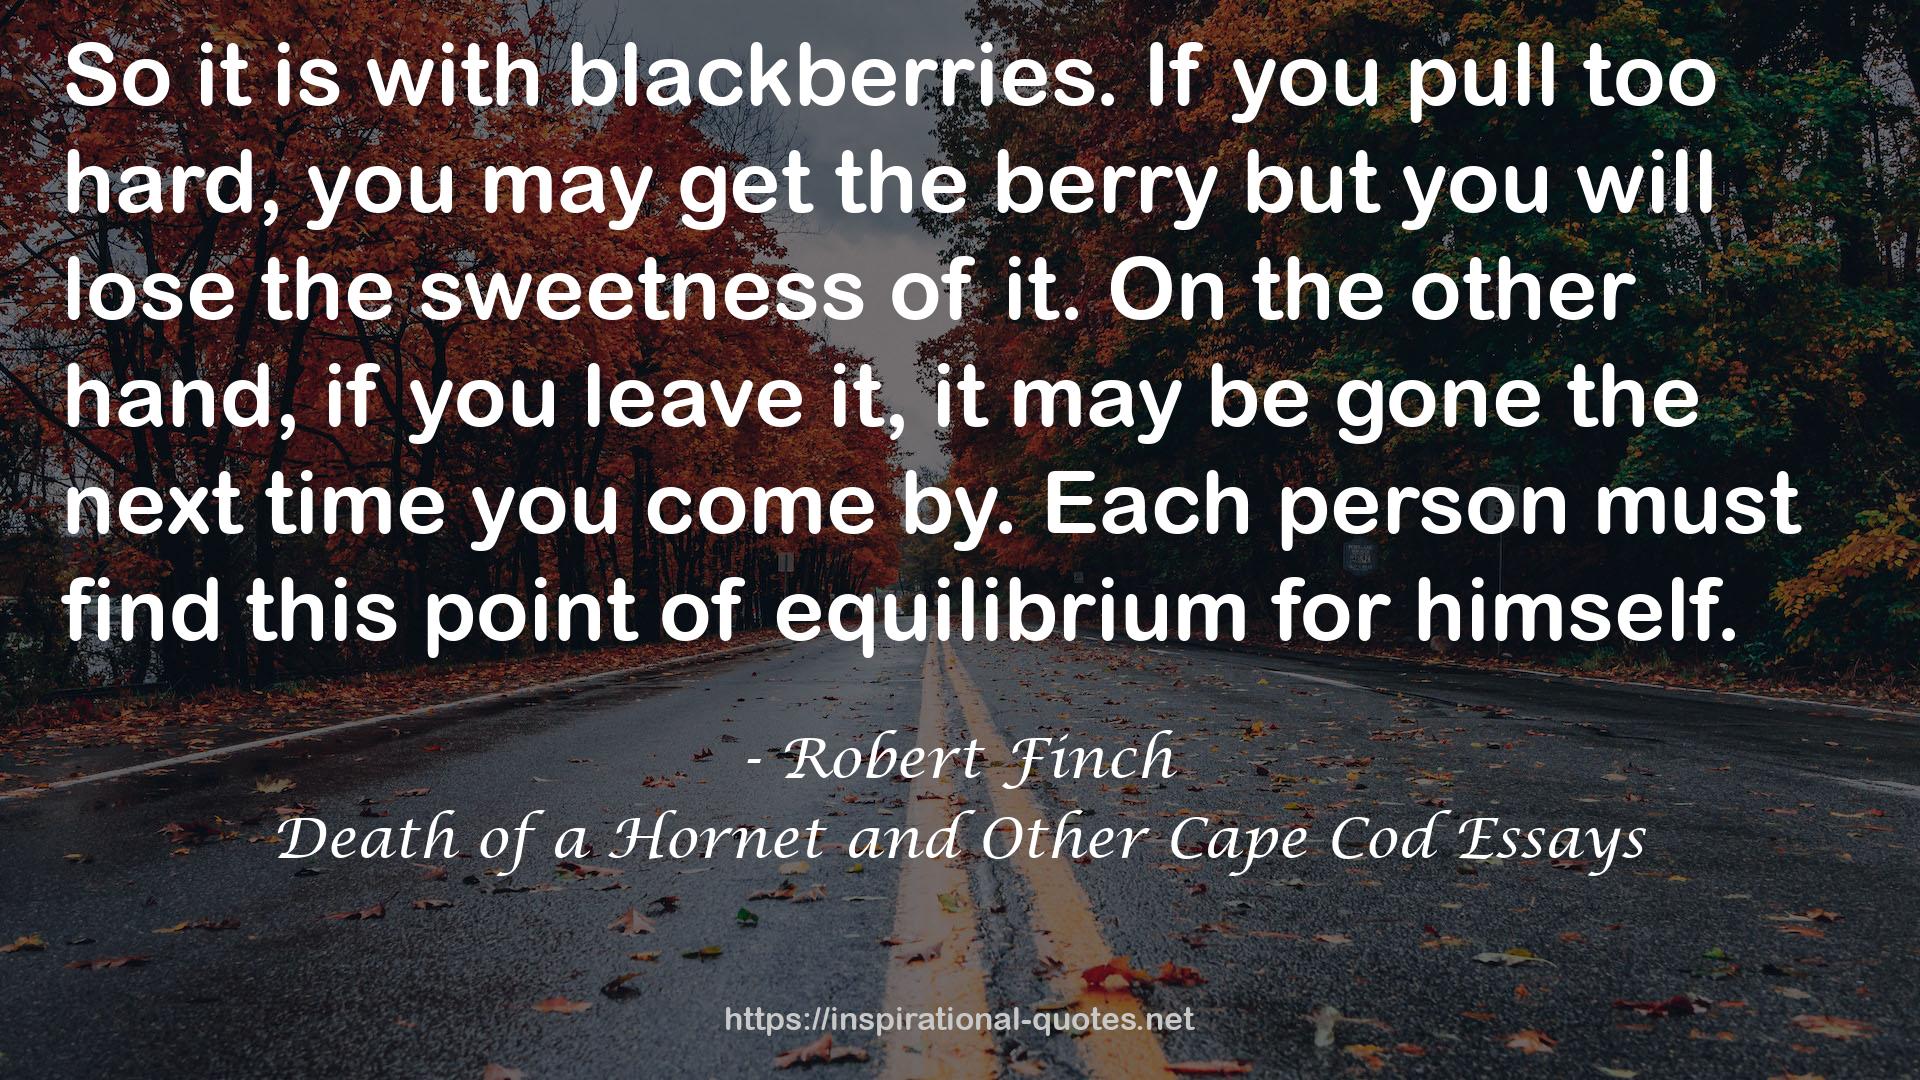 Death of a Hornet and Other Cape Cod Essays QUOTES